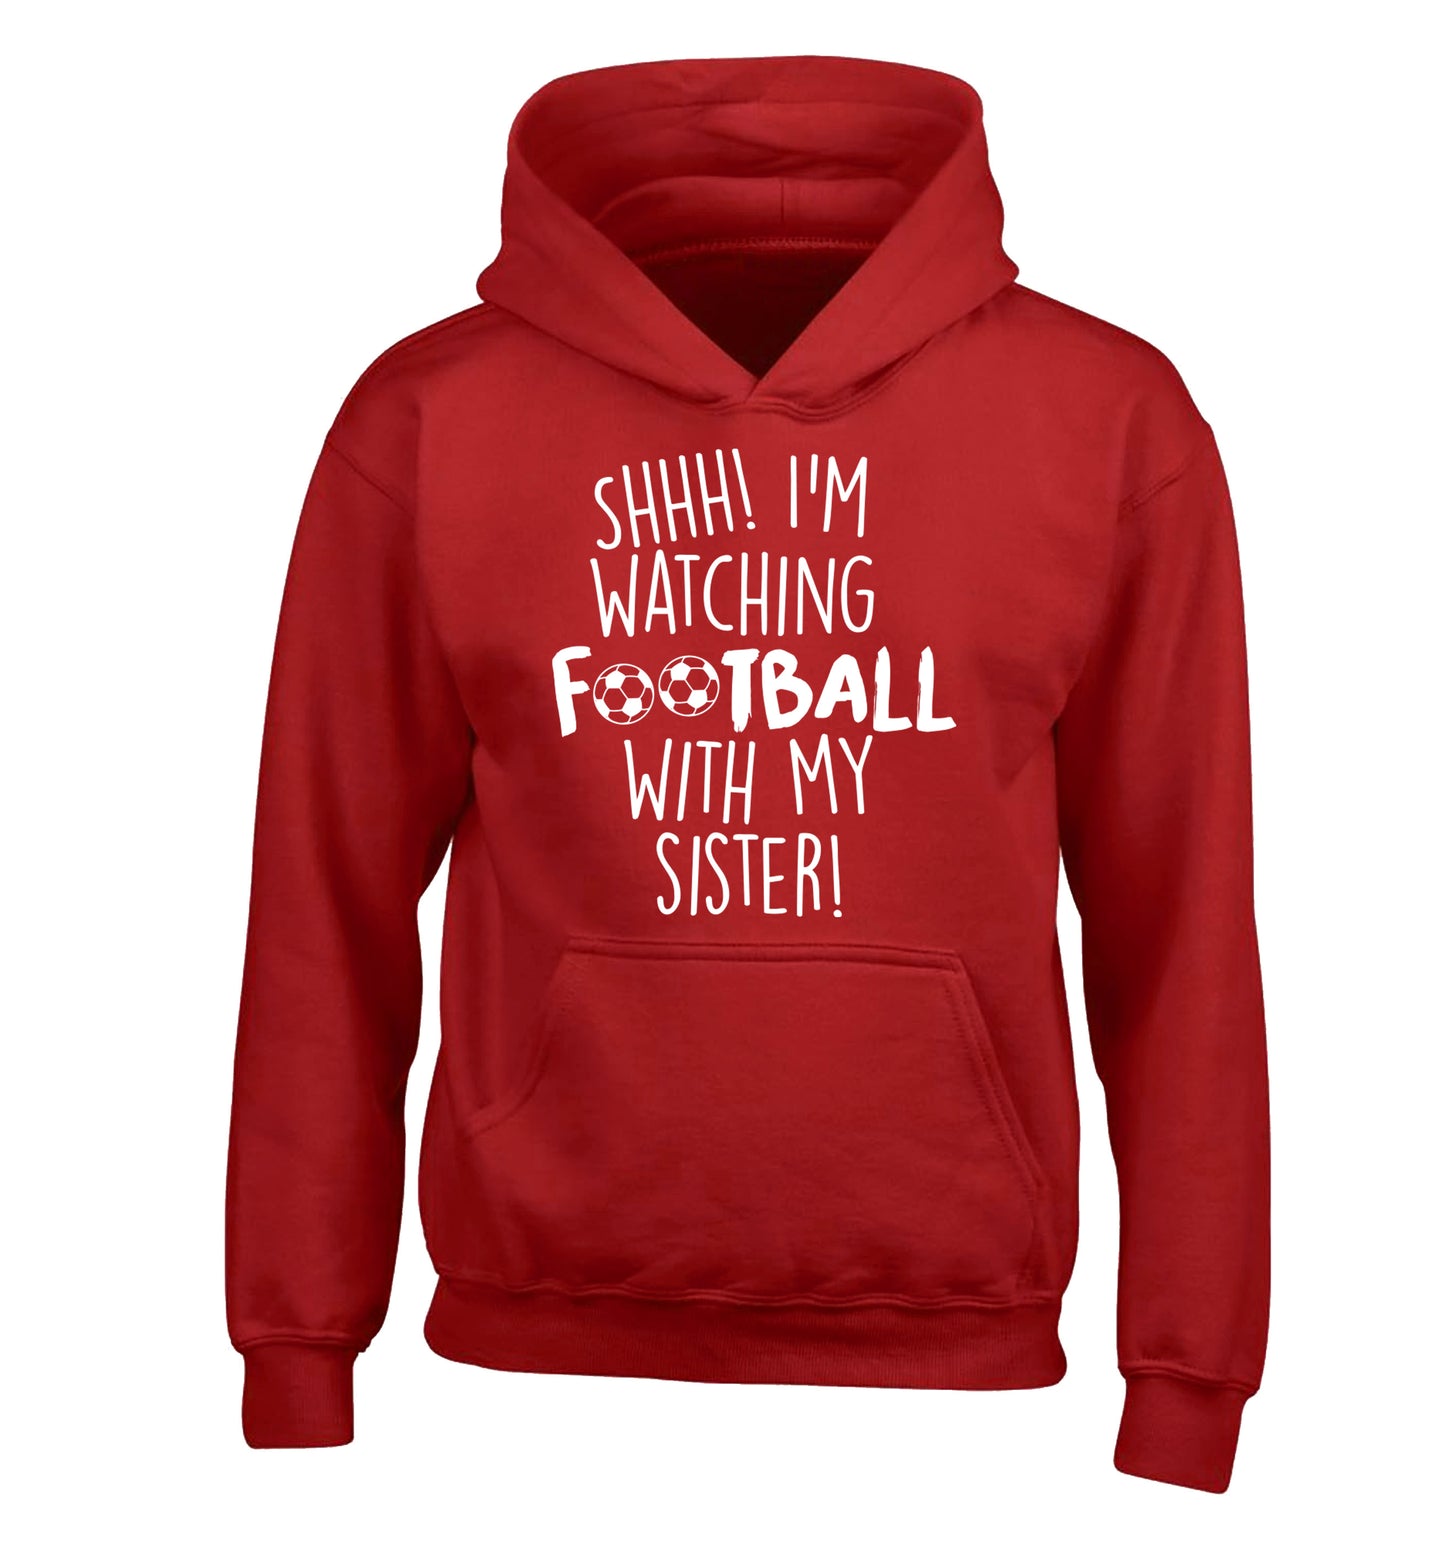 Shhh I'm watching football with my sister children's red hoodie 12-14 Years